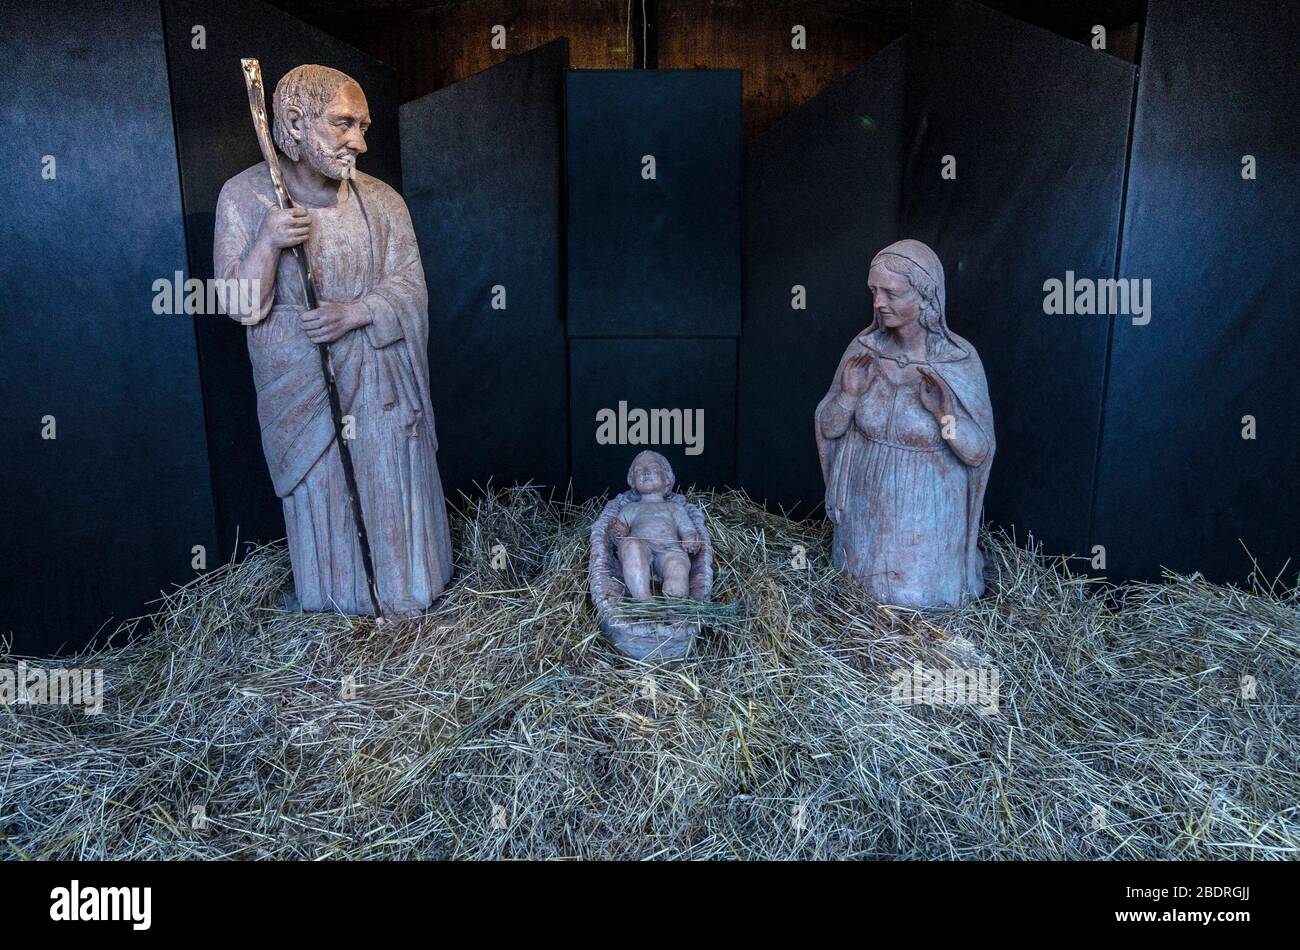 Representation of the traditional Christmas nativity scene with wooden statues Stock Photo